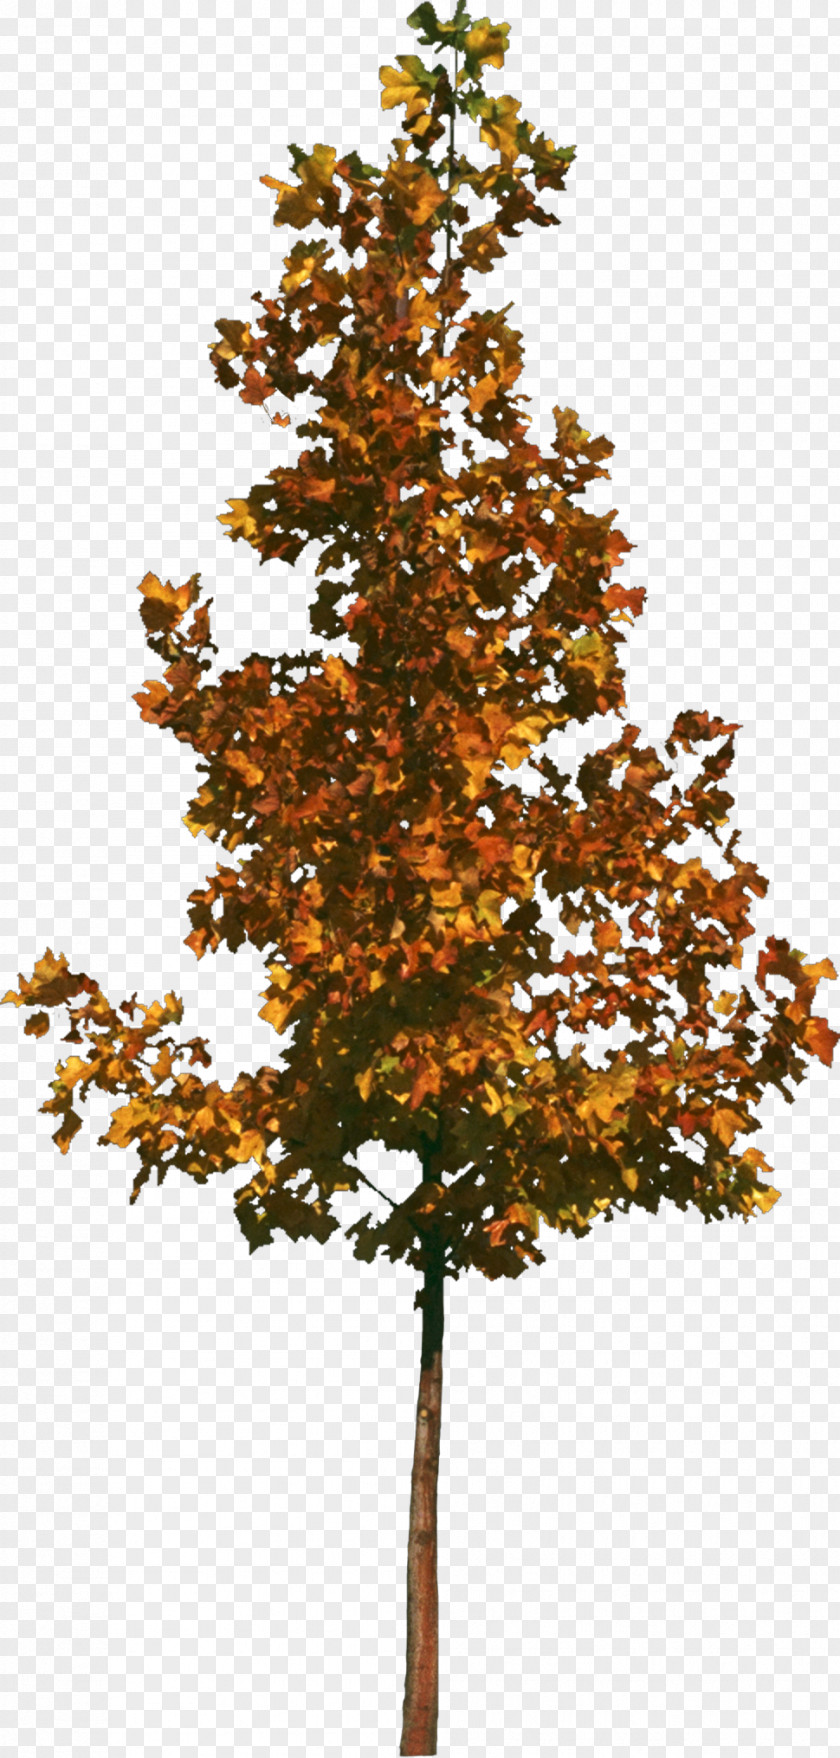 Bushes Tree Texture Mapping 3D Computer Graphics PNG